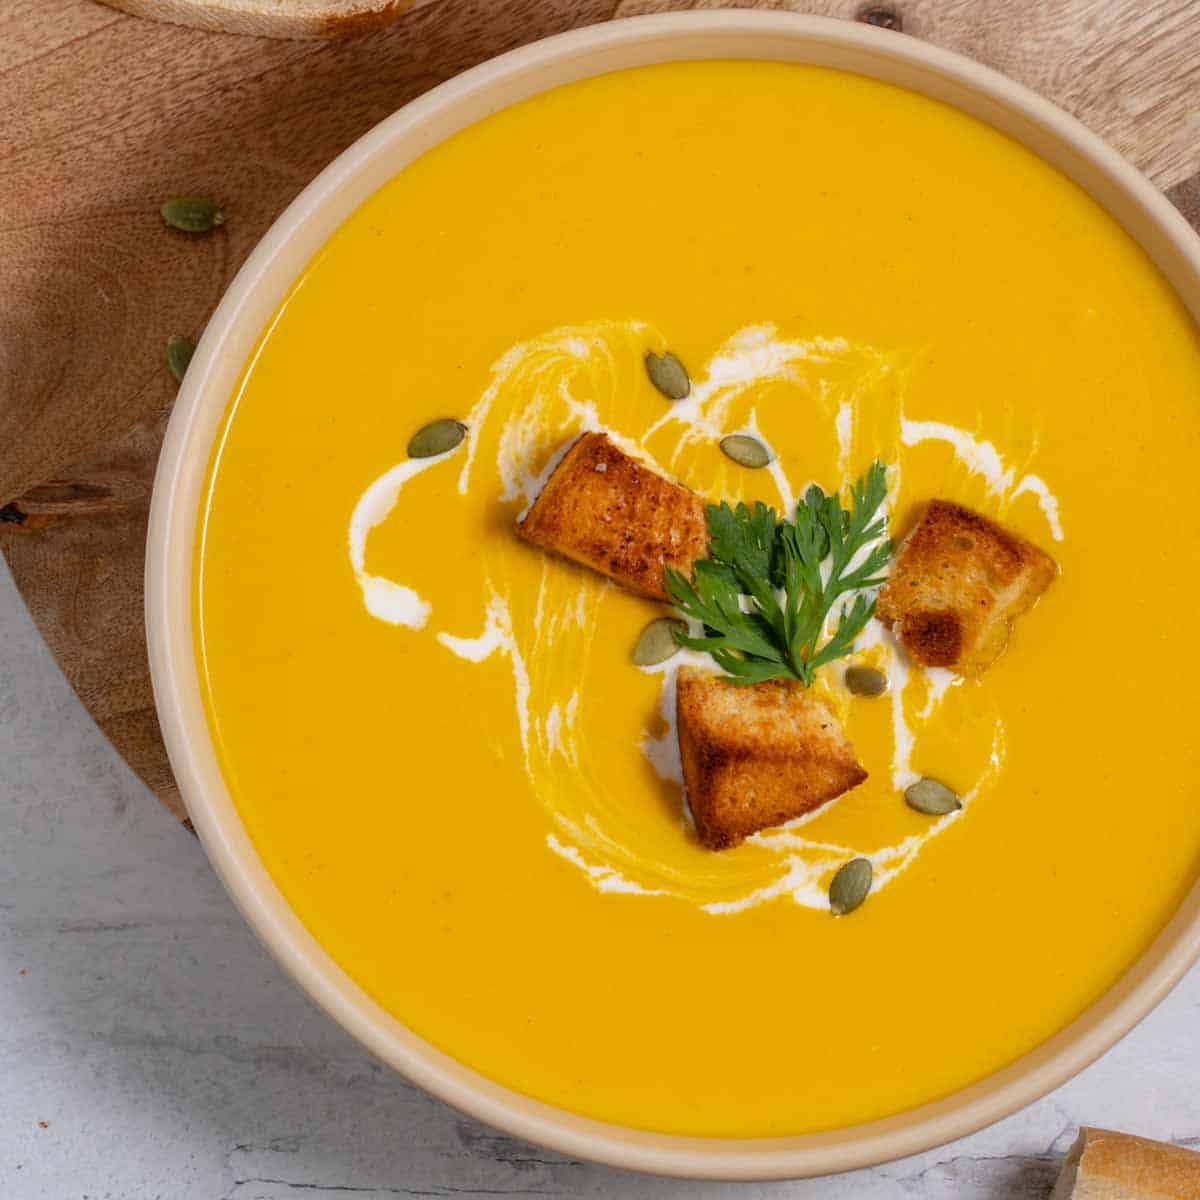 Bowl of butternut squash soup with cream cheese, garnished with croutons.